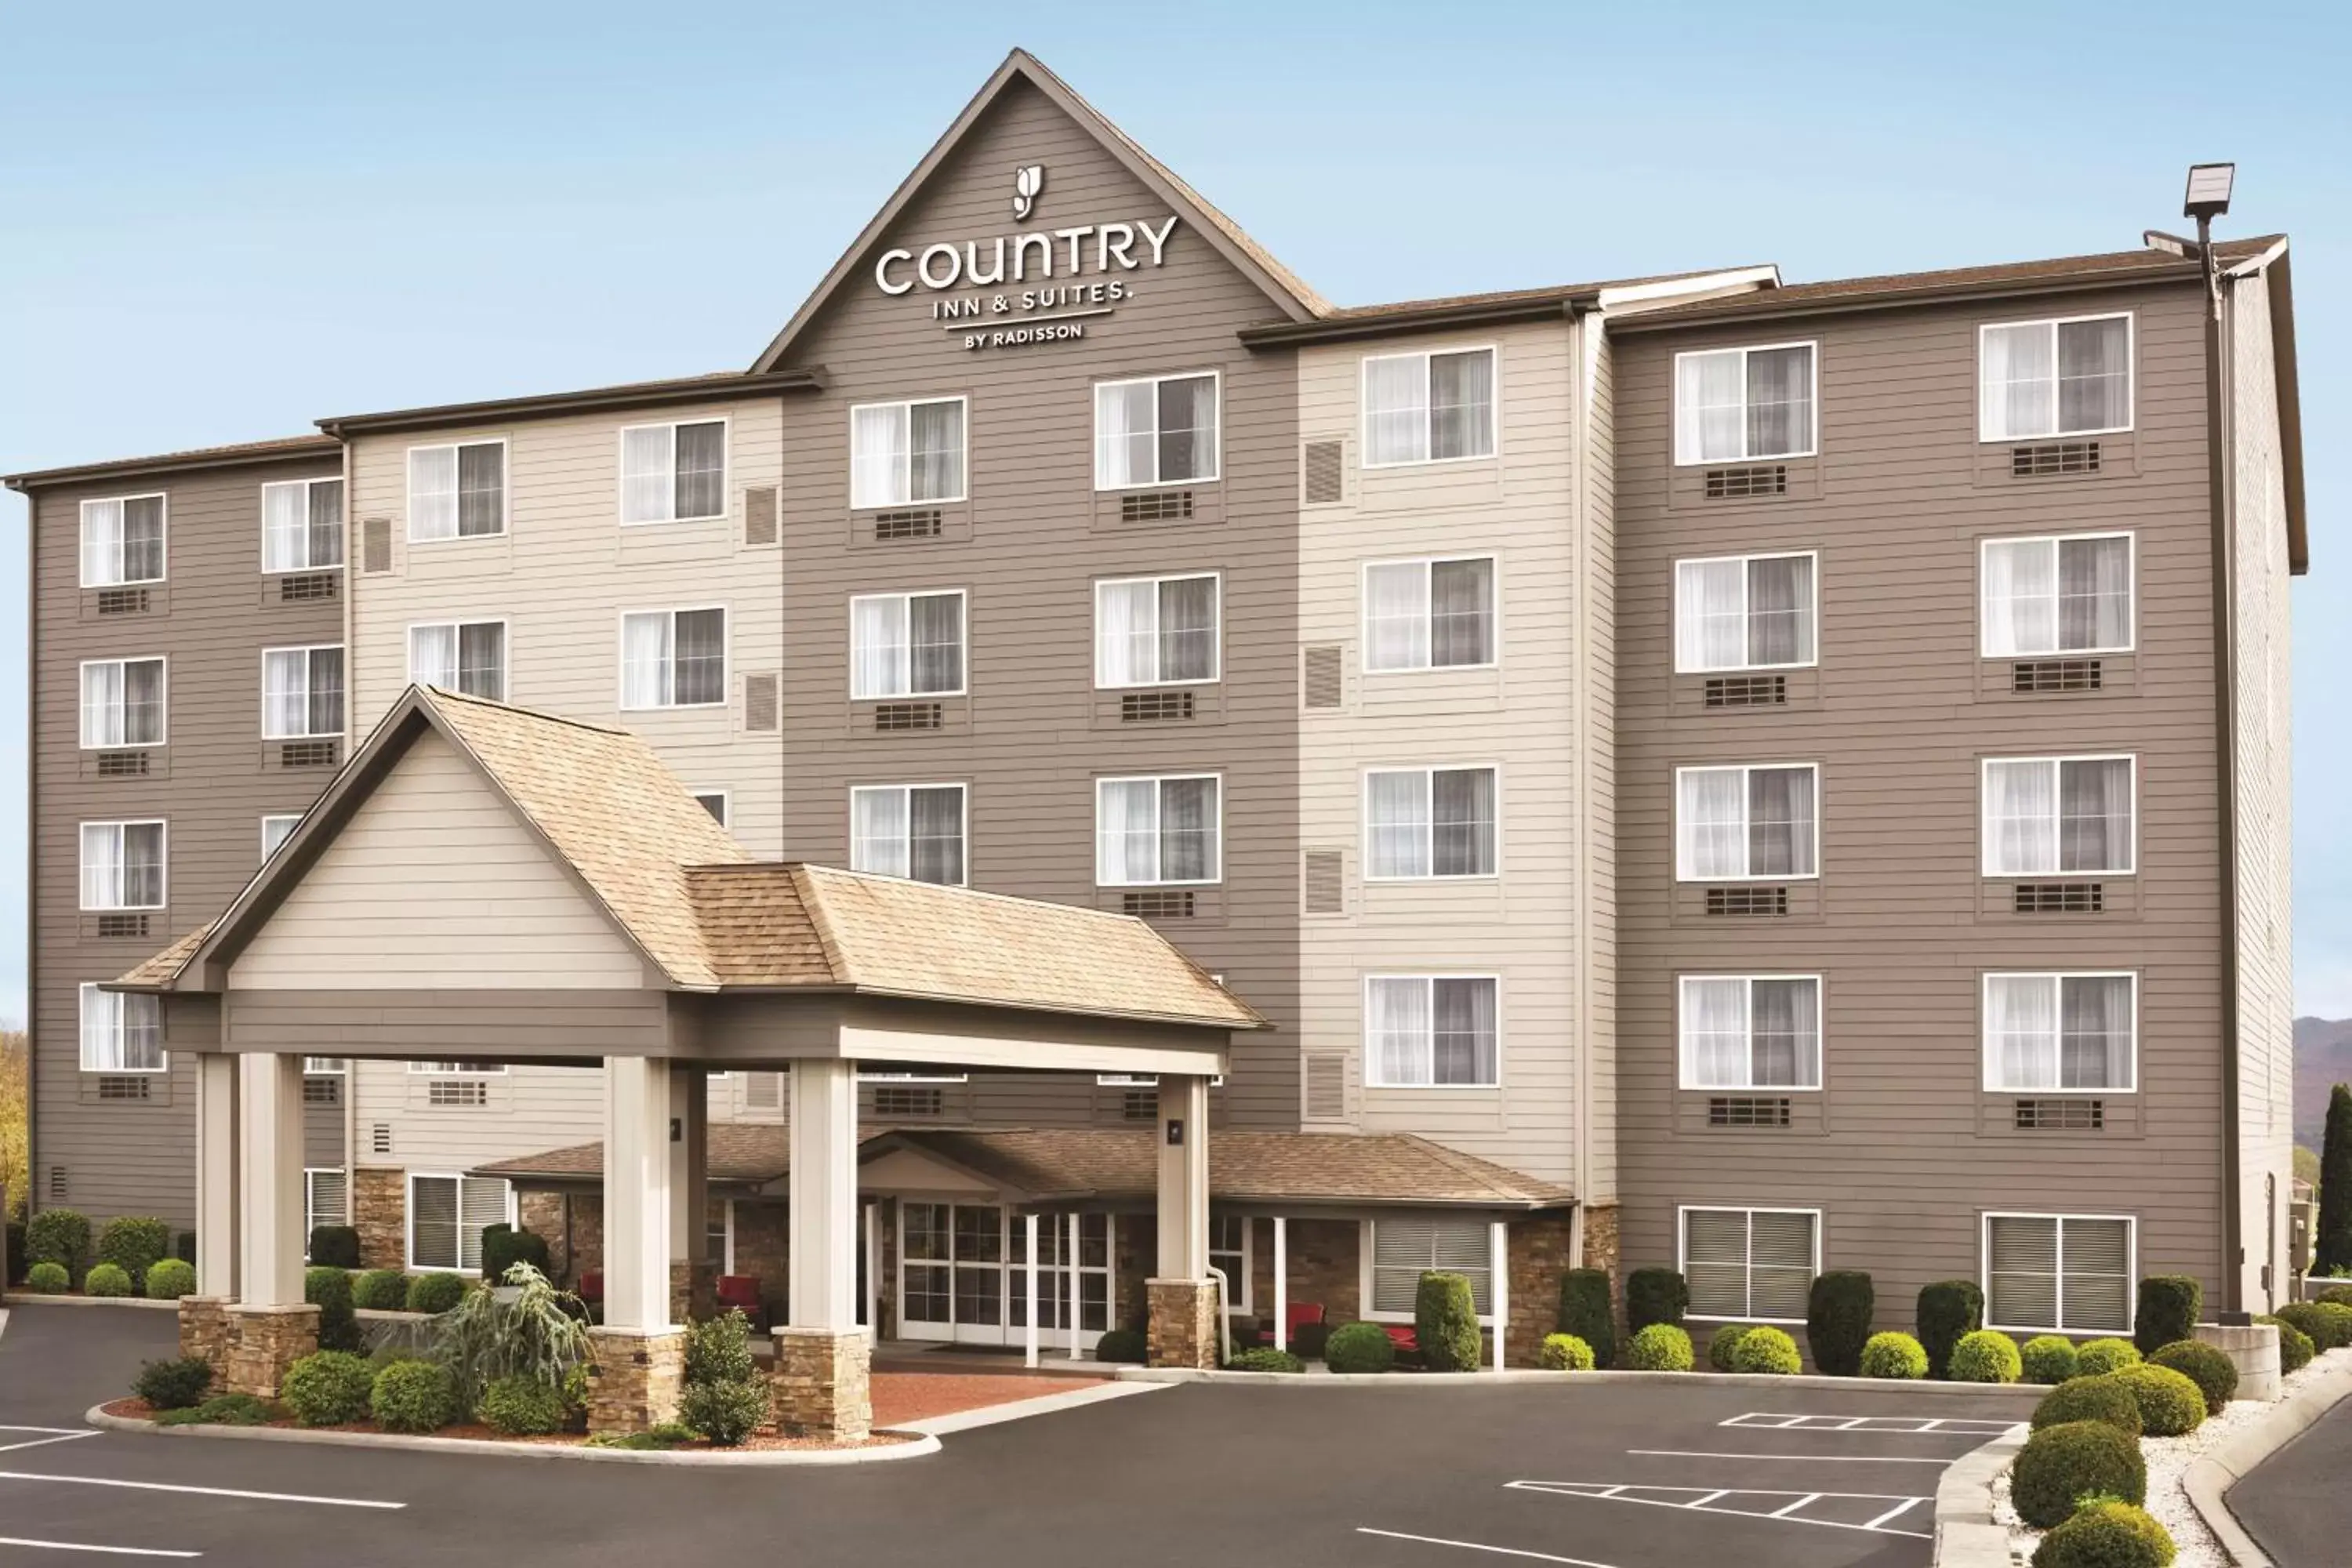 Property building in Country Inn & Suites by Radisson, Wytheville, VA